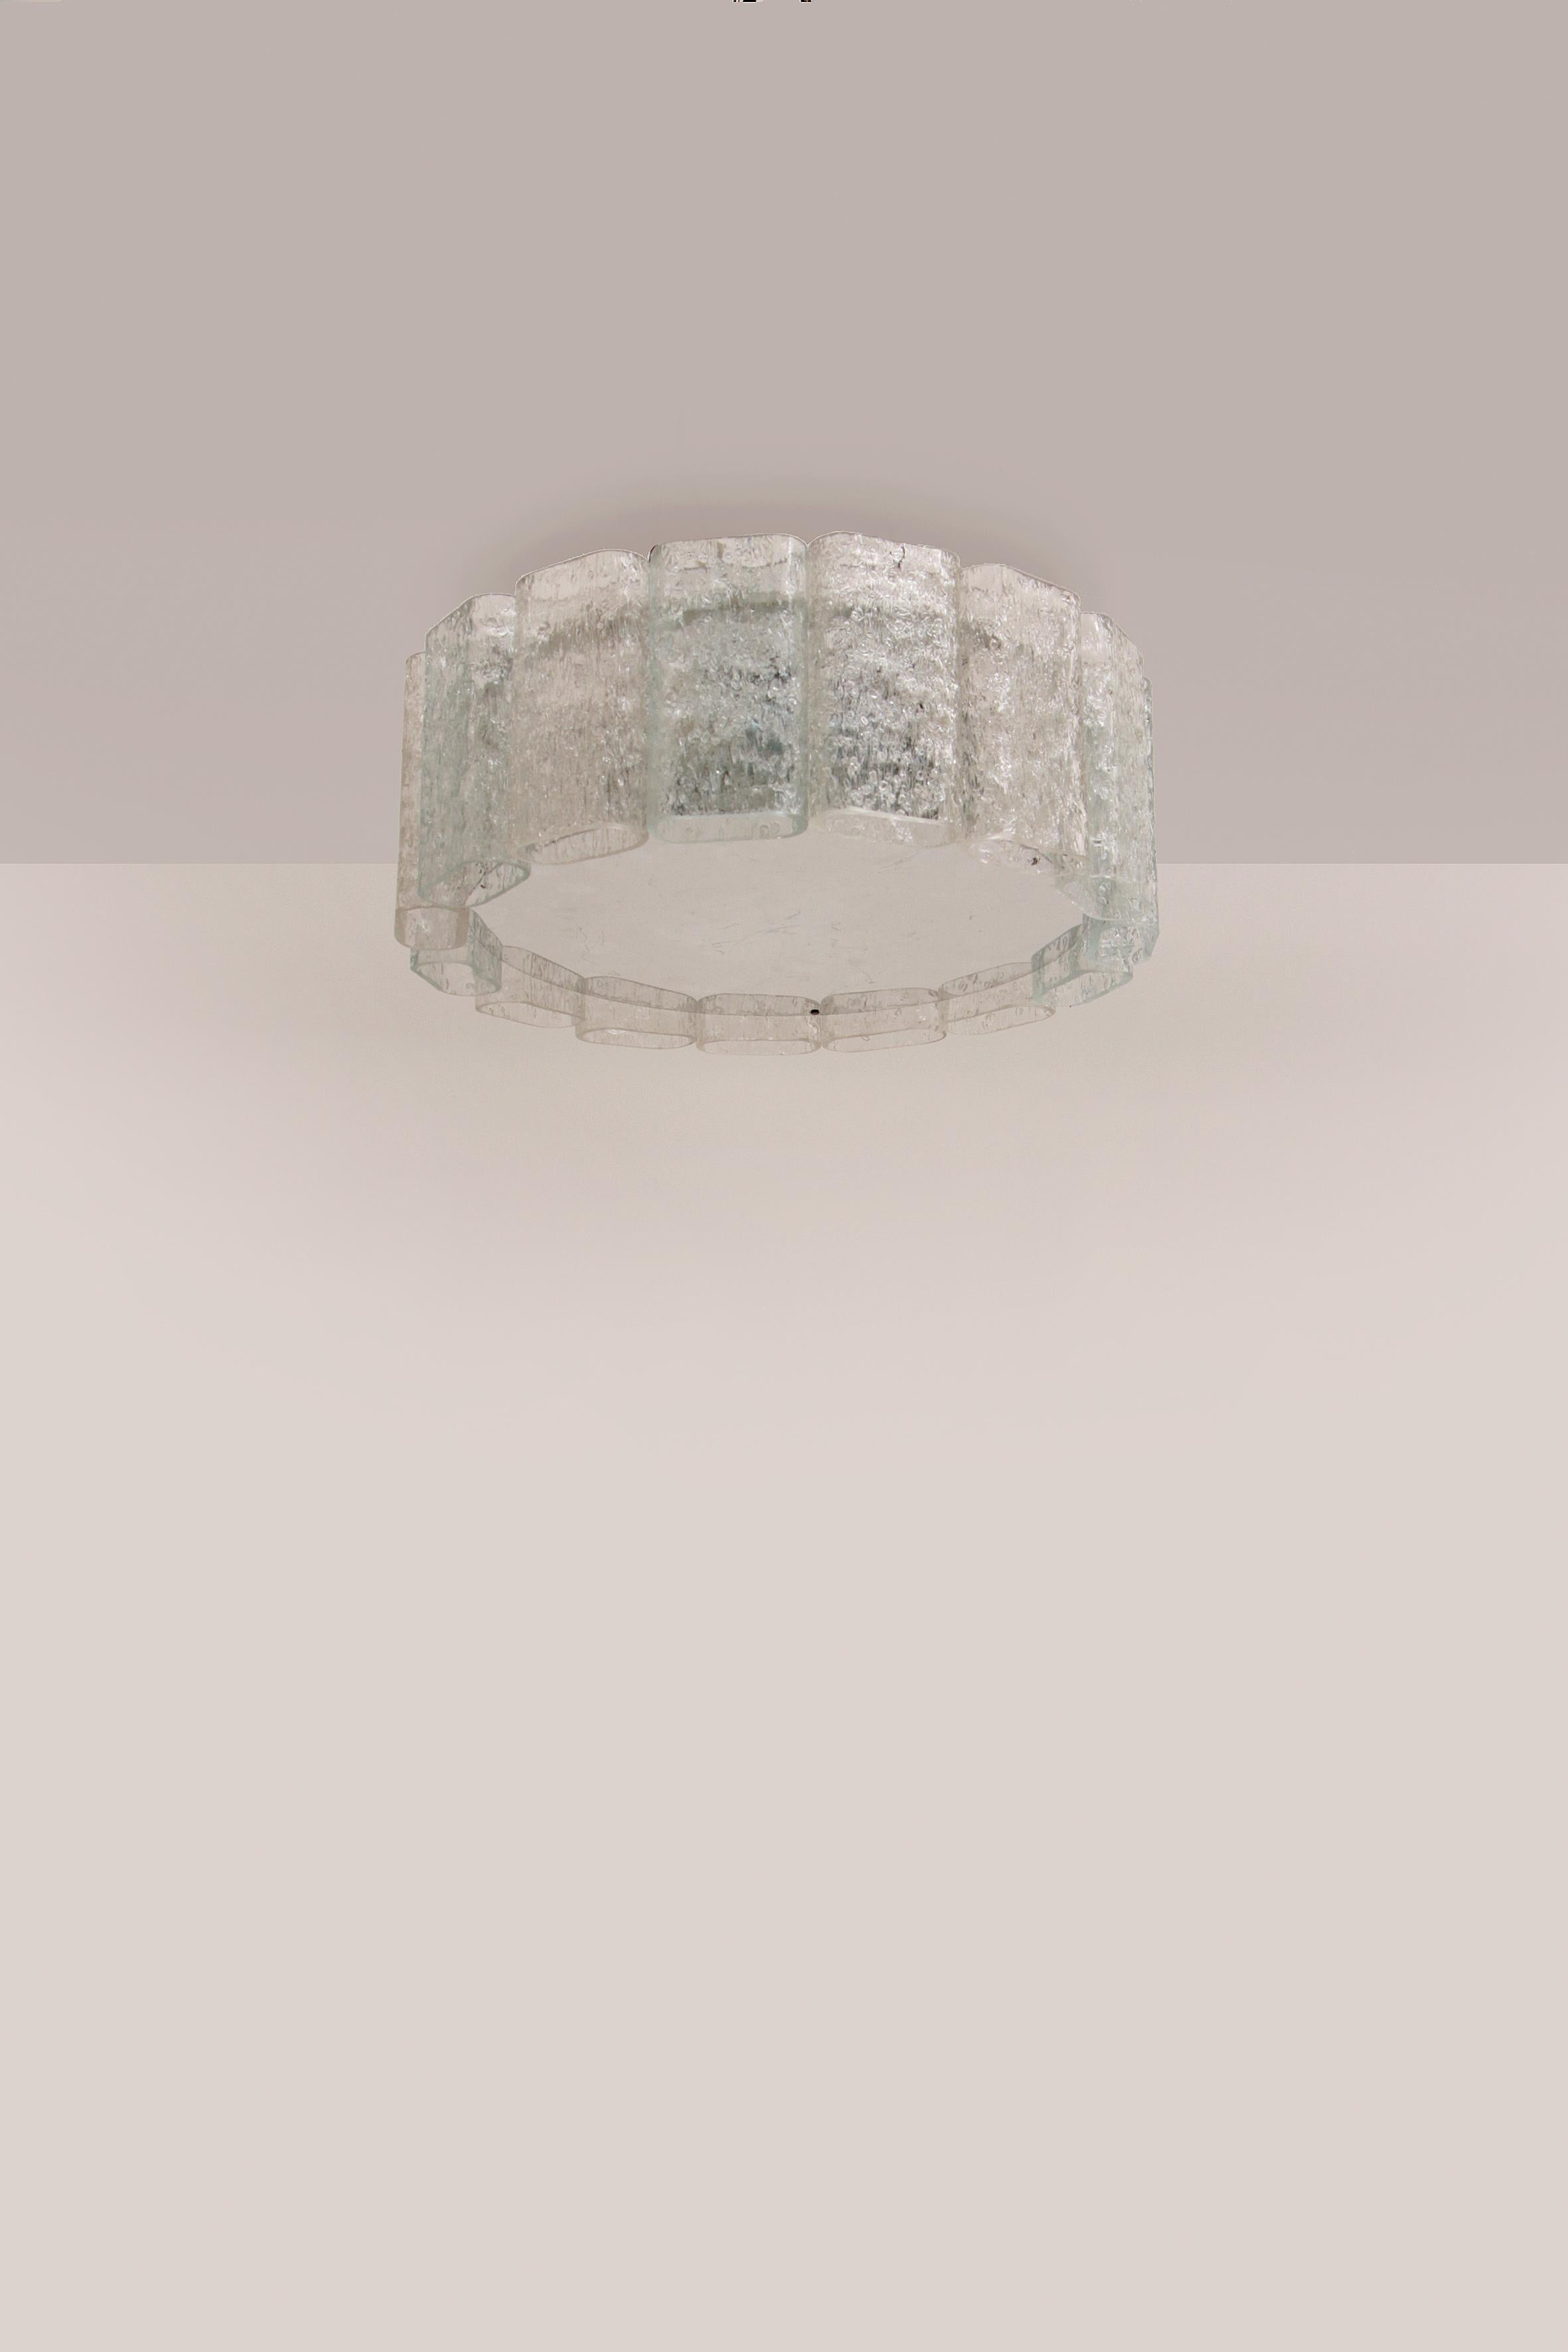 This is a very beautiful ice glass hanging lamp ceiling lamp.

This beautiful lamp was produced in the 1960s by Doria Leuchten.

The lamp consists of 18 mouth-blown large glass cylinders that are made of crystal clear relief glass. The glass